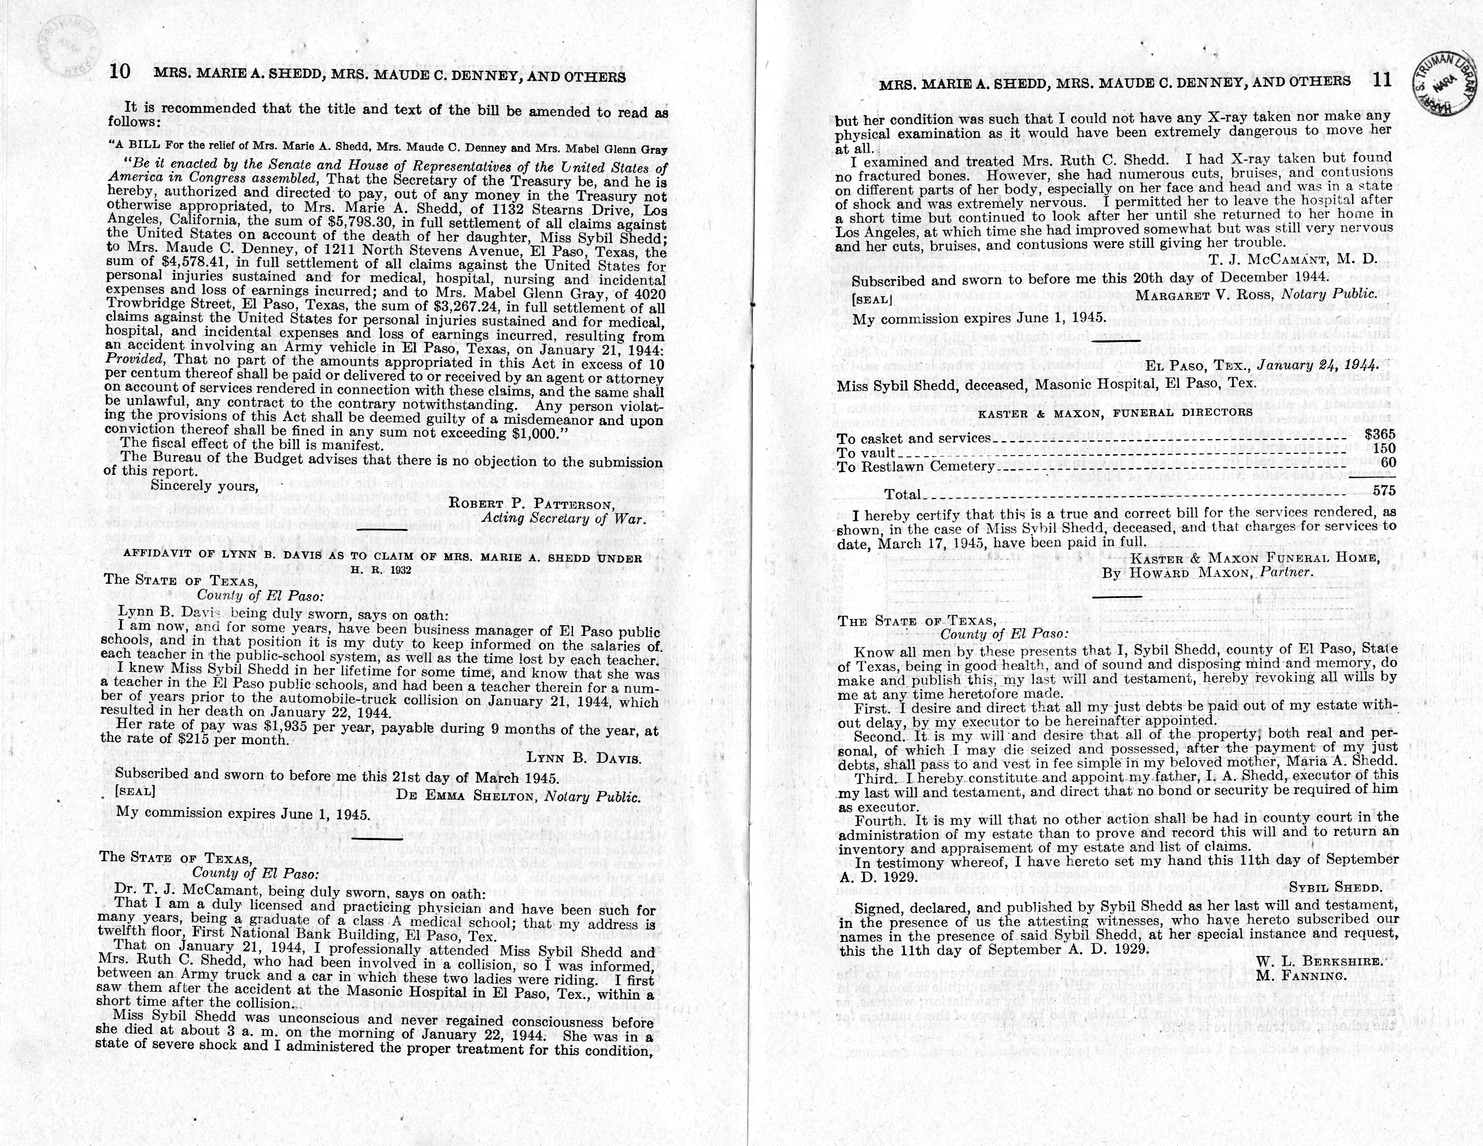 Memorandum from Frederick J. Bailey to M. C. Latta, H. R. 1732, For the Relief of Mrs. Marie A. Shedd, Mrs. Maude C. Denny, and Mrs. Mabel Glenn Gray, with Attachments